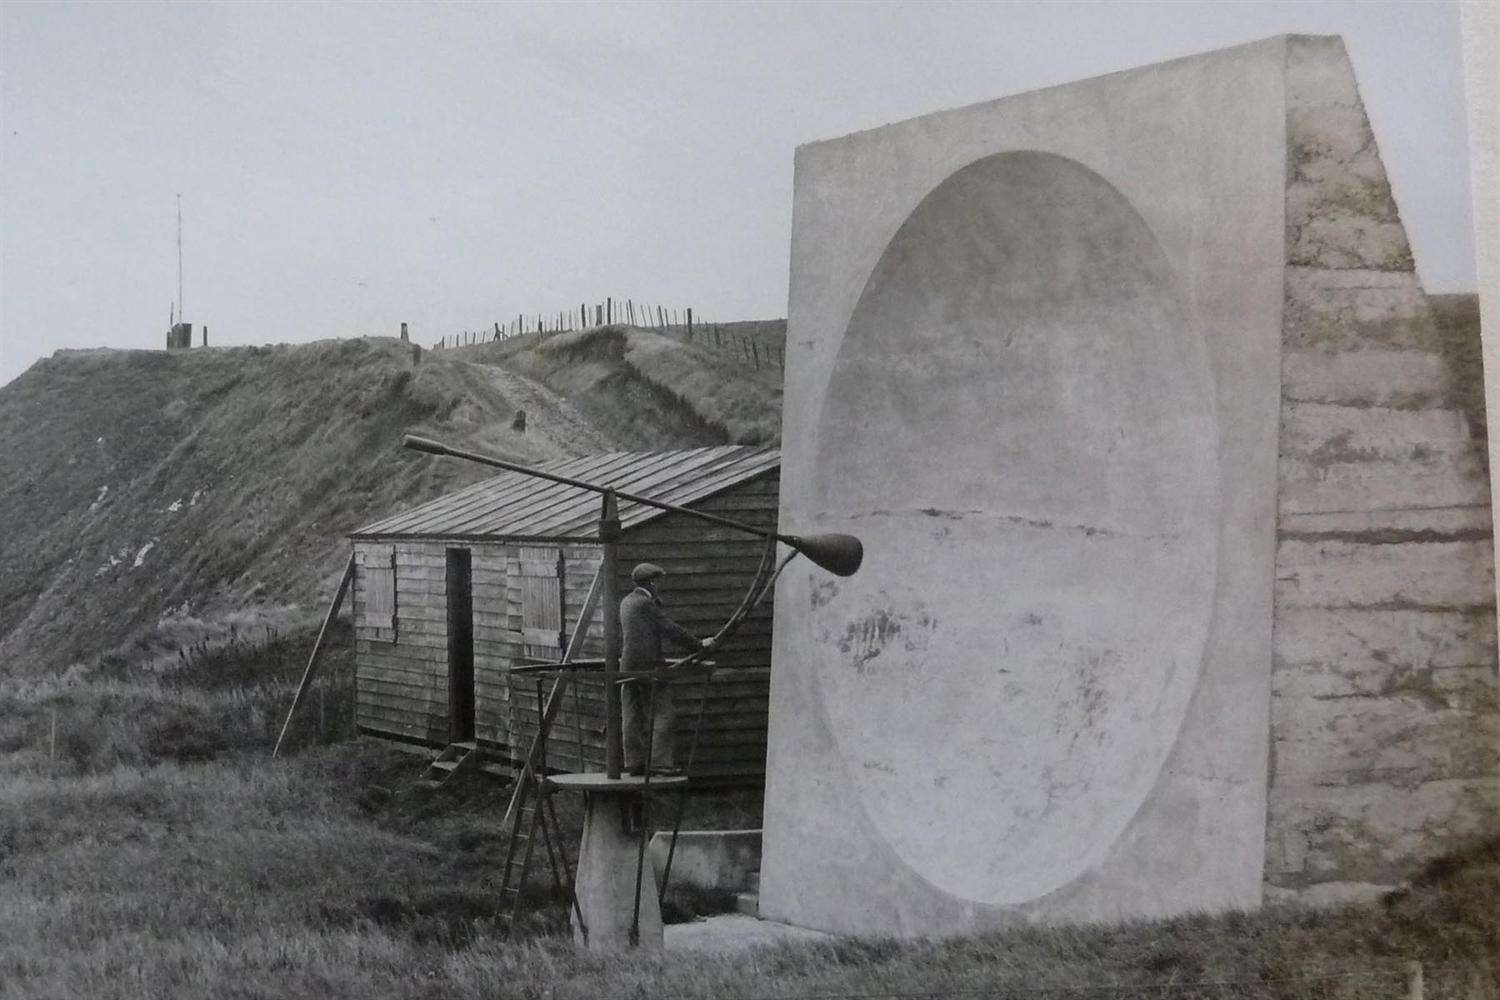 Example of sound mirror in use at Abbott's Cliff